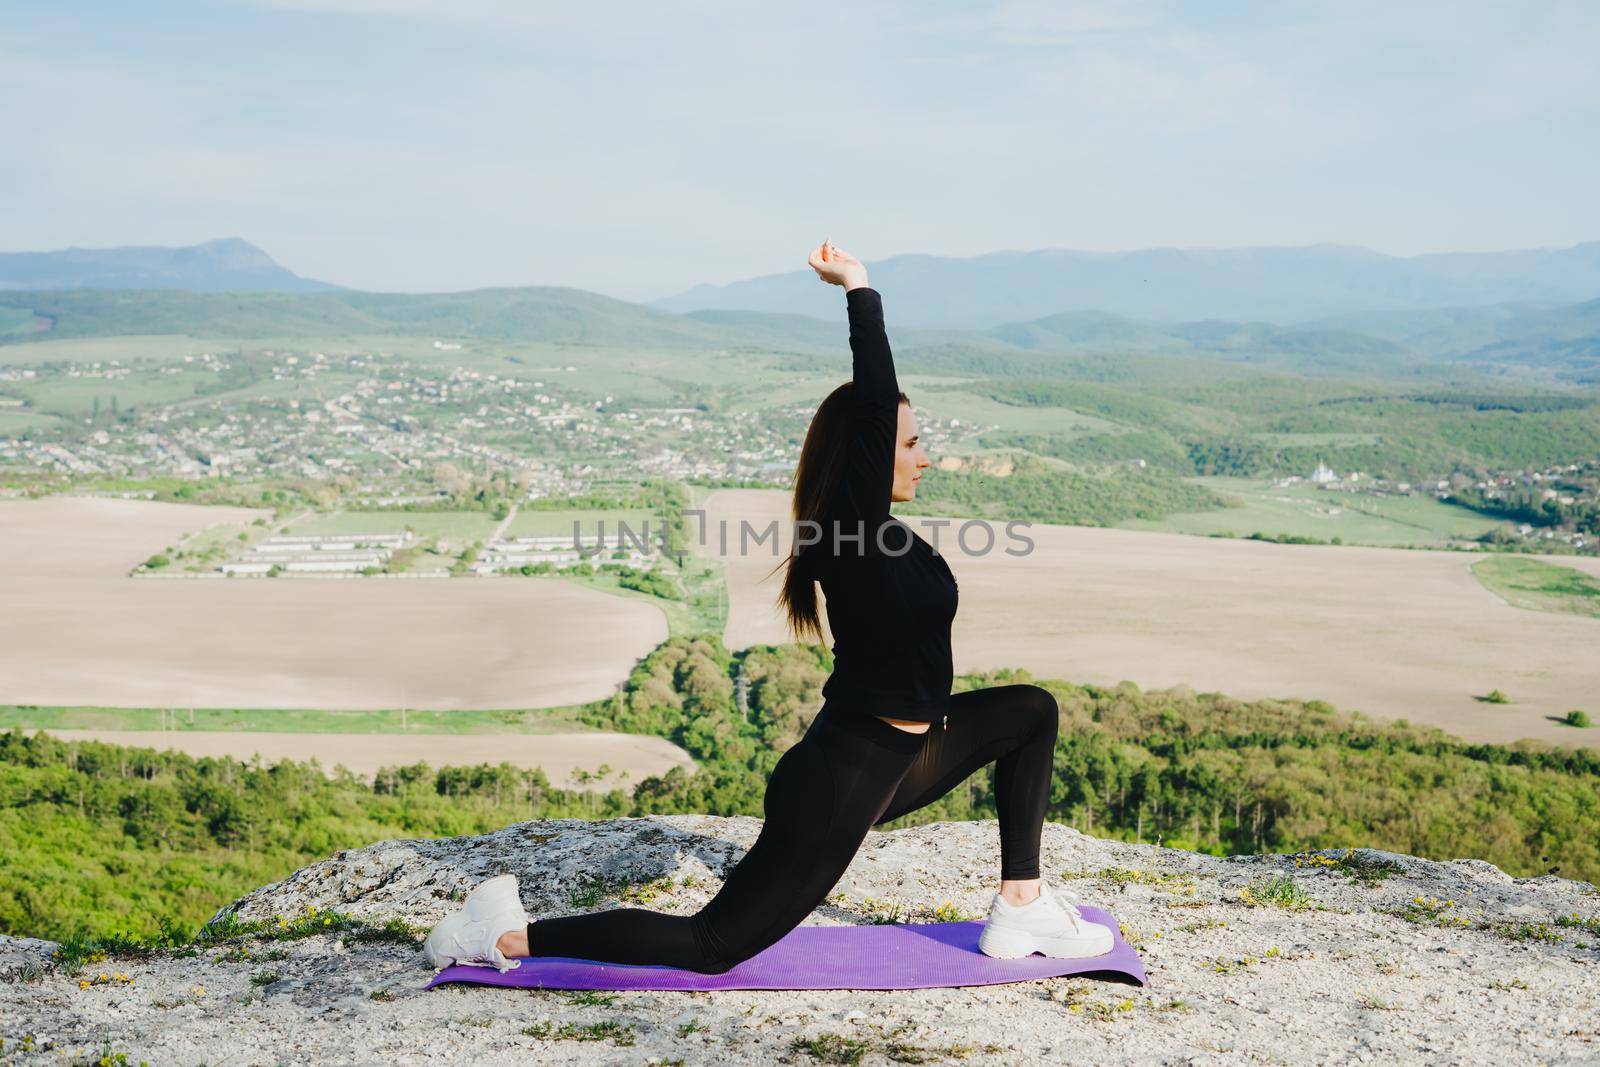 Yoga classes in the open air. Outdoor sports. A beautiful athlete in the mountains. Sports during quarantine and self-isolation.